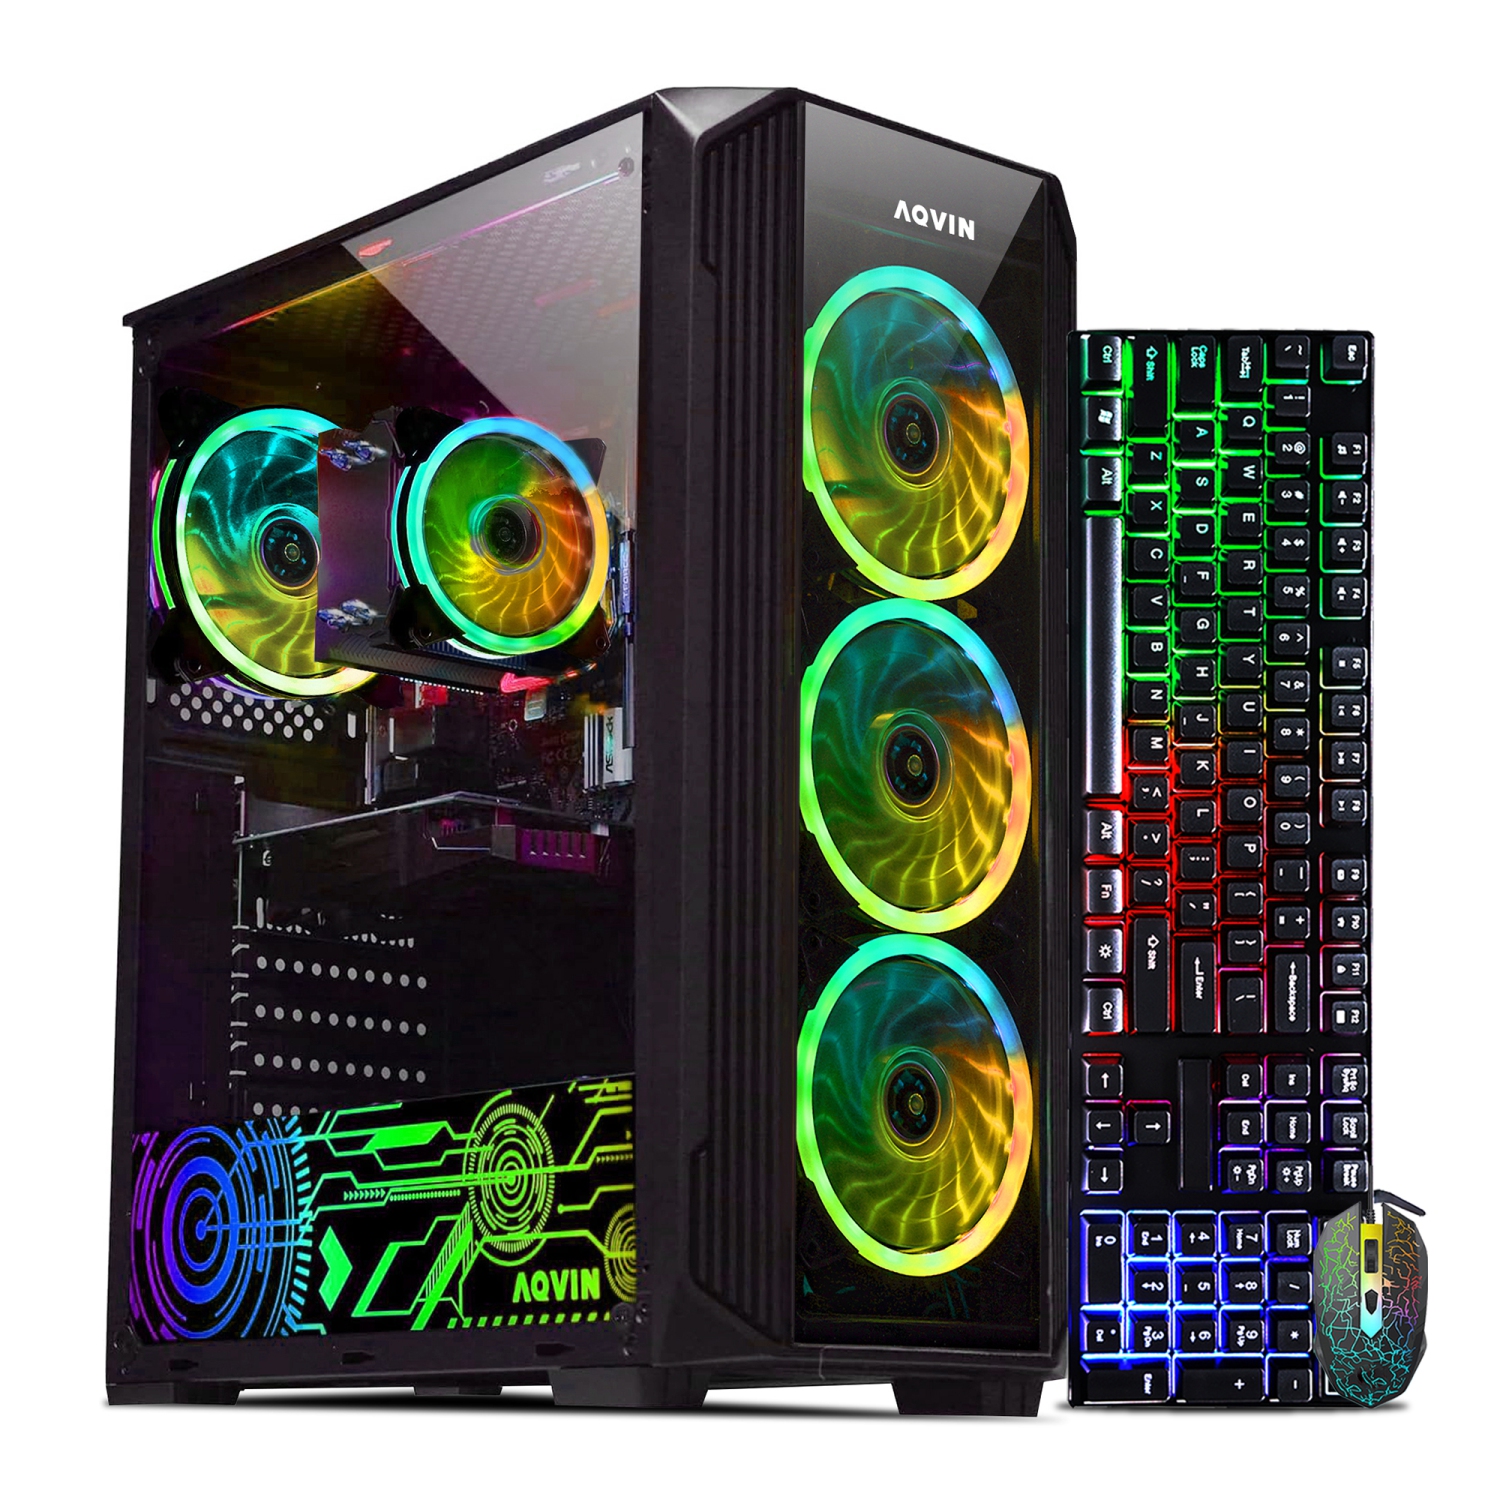 Refurbished (Excellent) Gaming PC AQVIN Desktop Computer Tower - Black, Intel Core i7 up to 4.0 GHz 1TB SSD 32GB DDR4 RAM, GeForce RTX 3060 12GB, Windows 10 Pro - Only at Best Buy